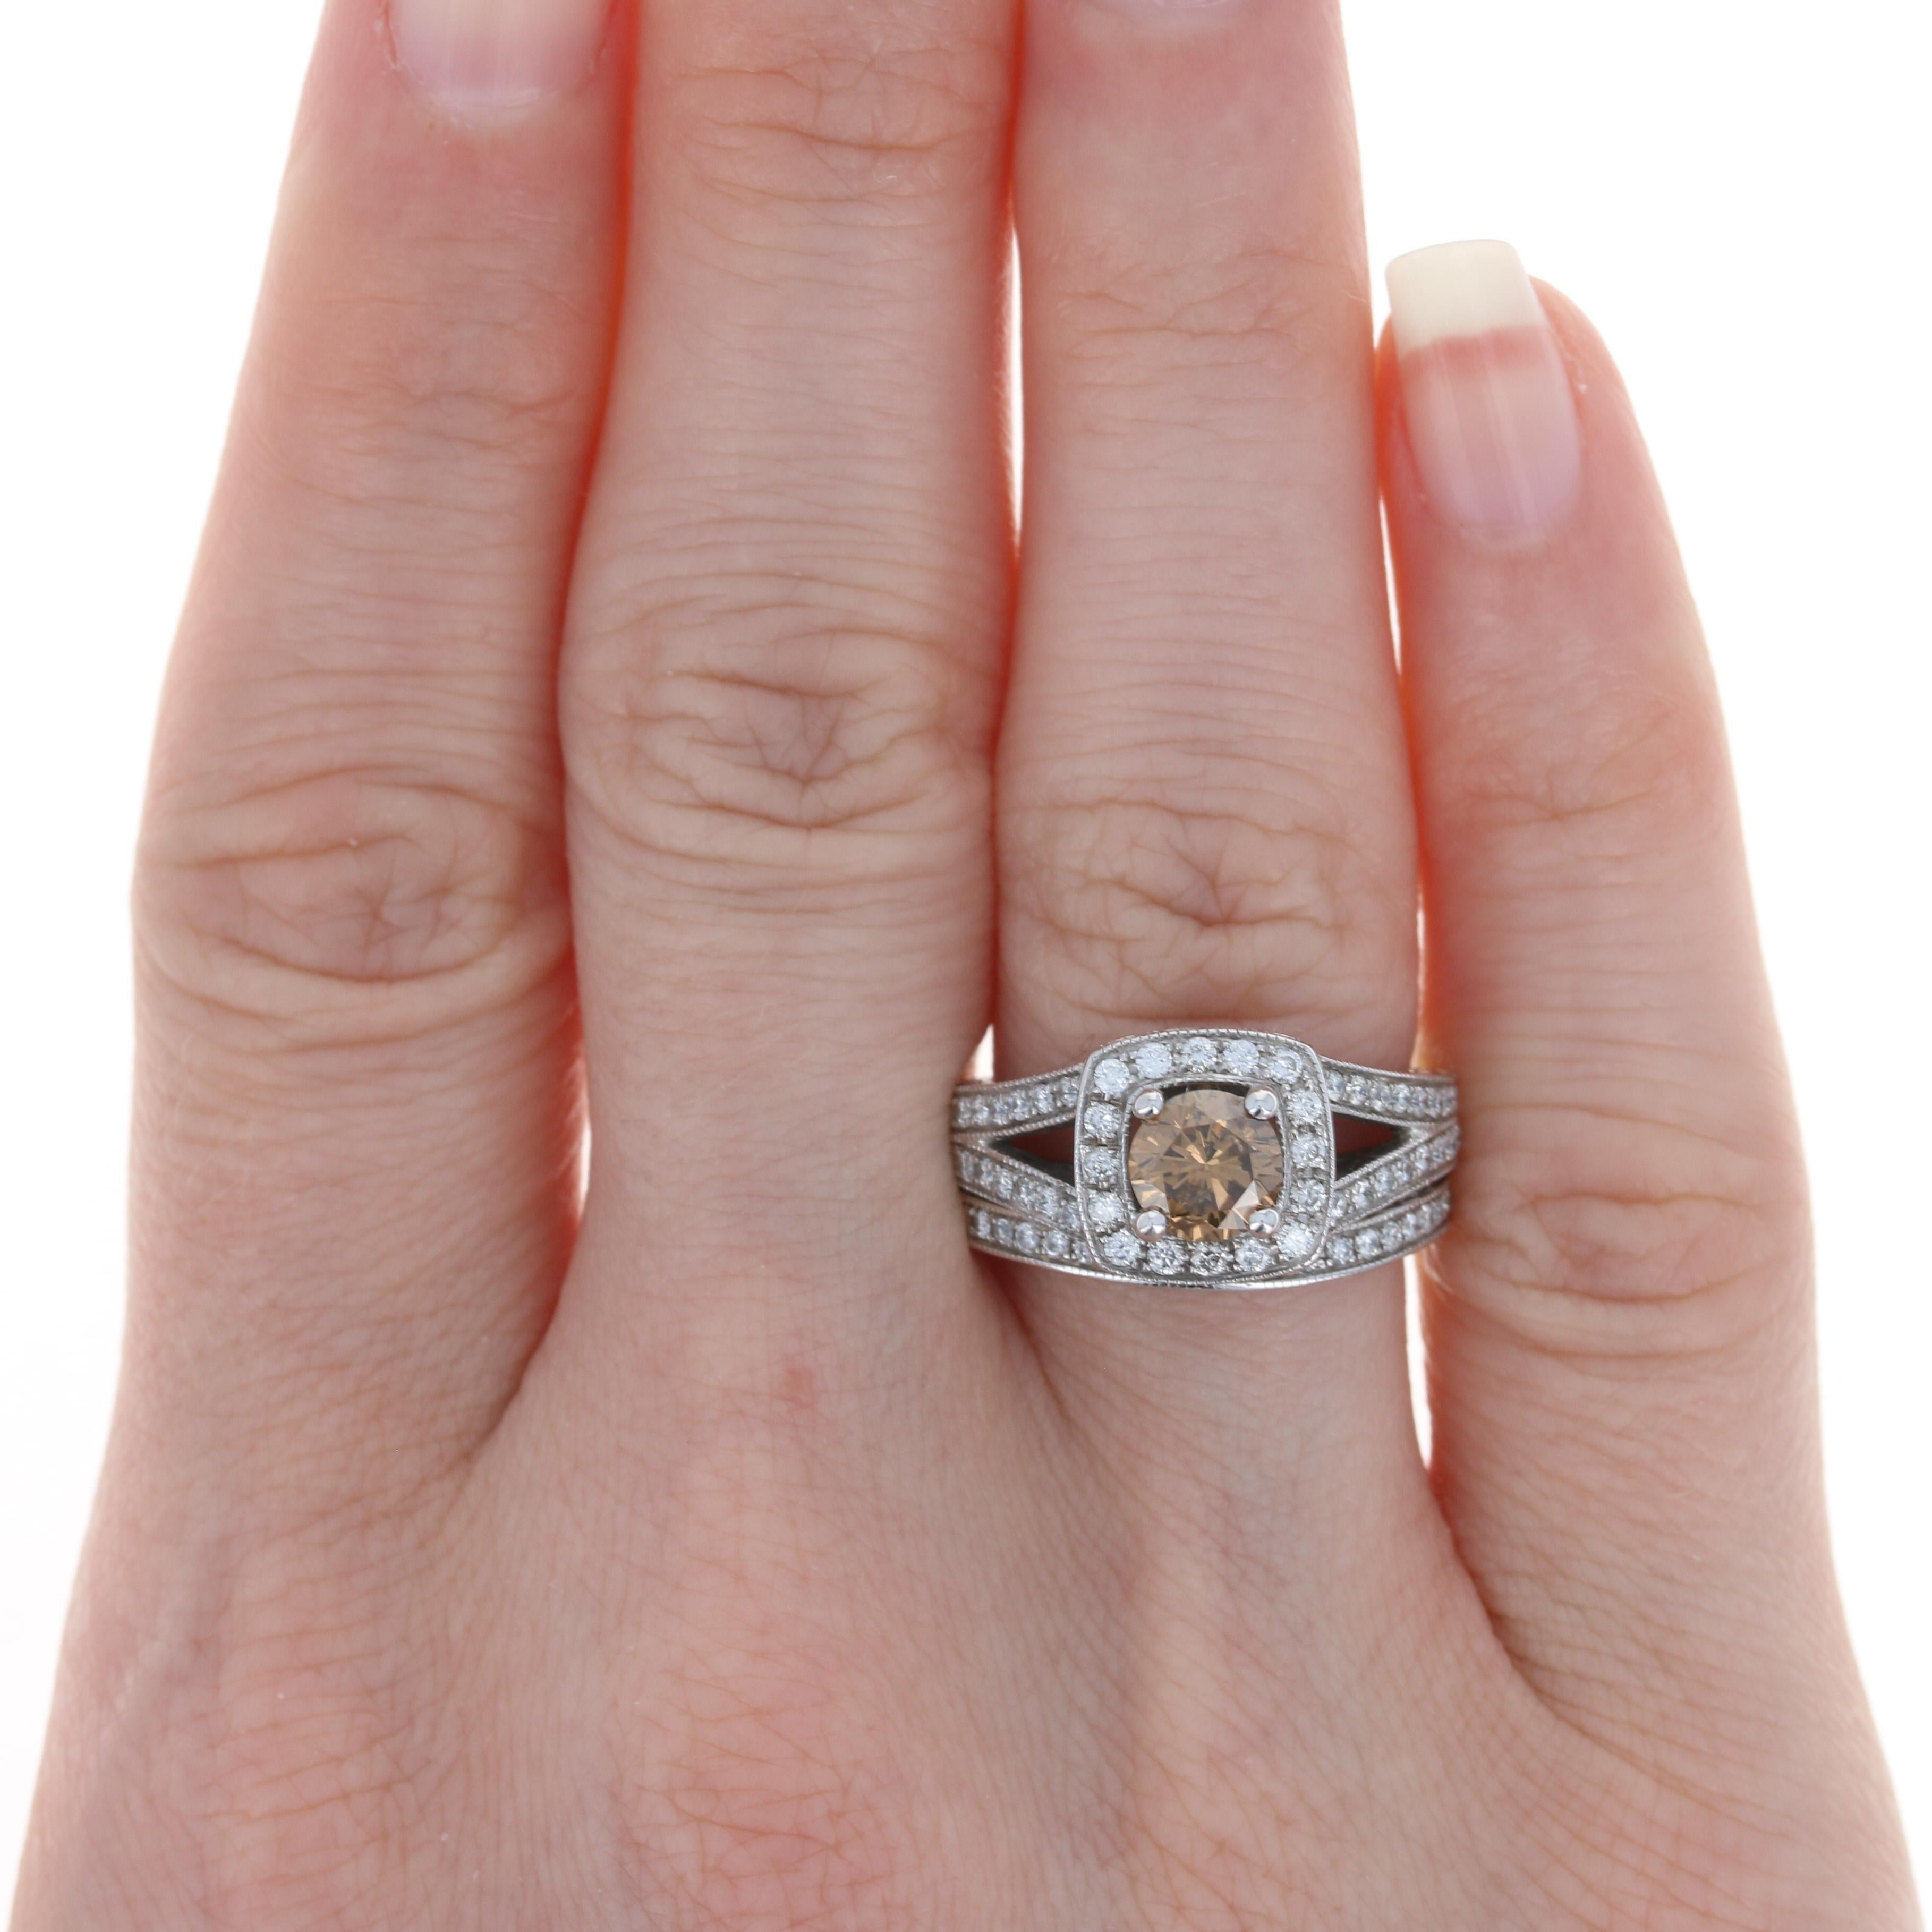 For Sale:  Diamond Halo Engagement Ring & Wedding Band, 14k Gold Fancy Brown 2.15ctw 3